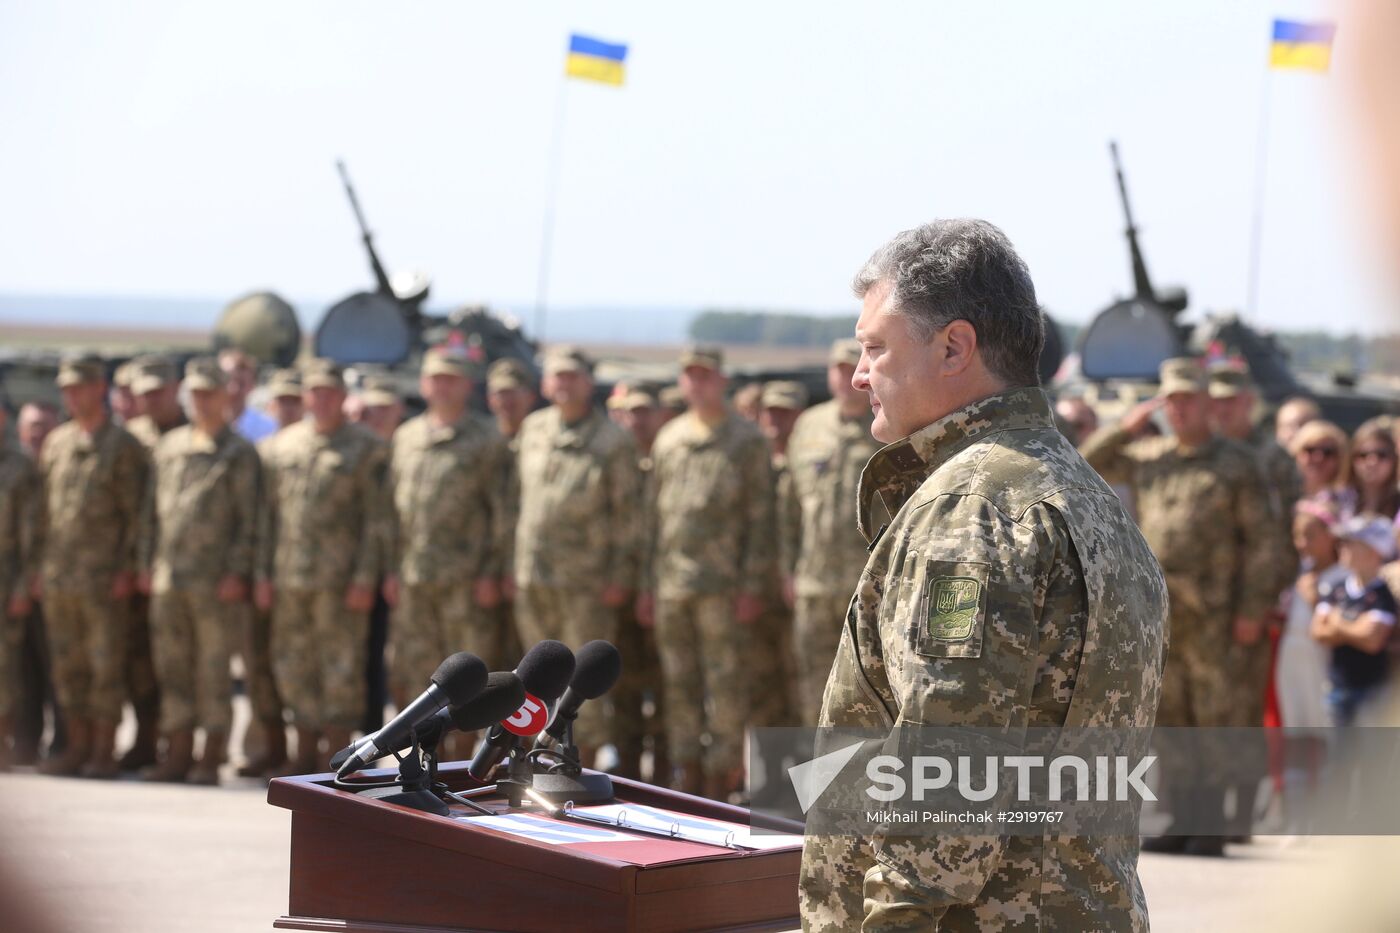 Ukrainian Armed Forces receive 141 units of military equipment